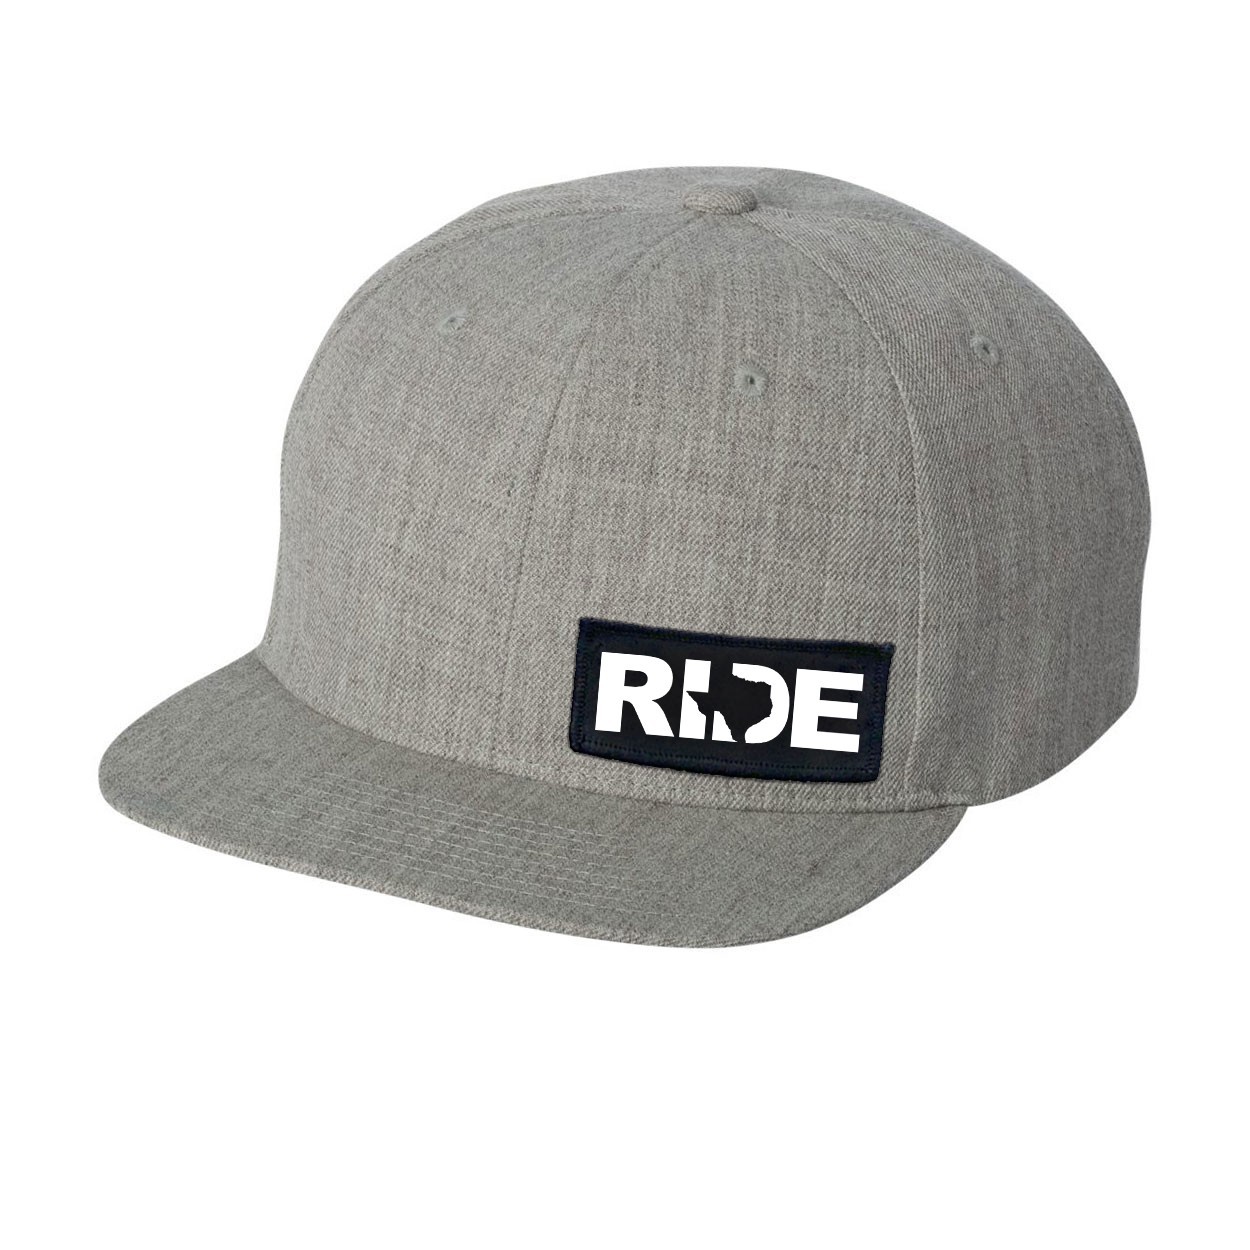 Ride Texas Night Out Woven Patch Flat Brim Snapback Hat Heather Gray (White Logo)